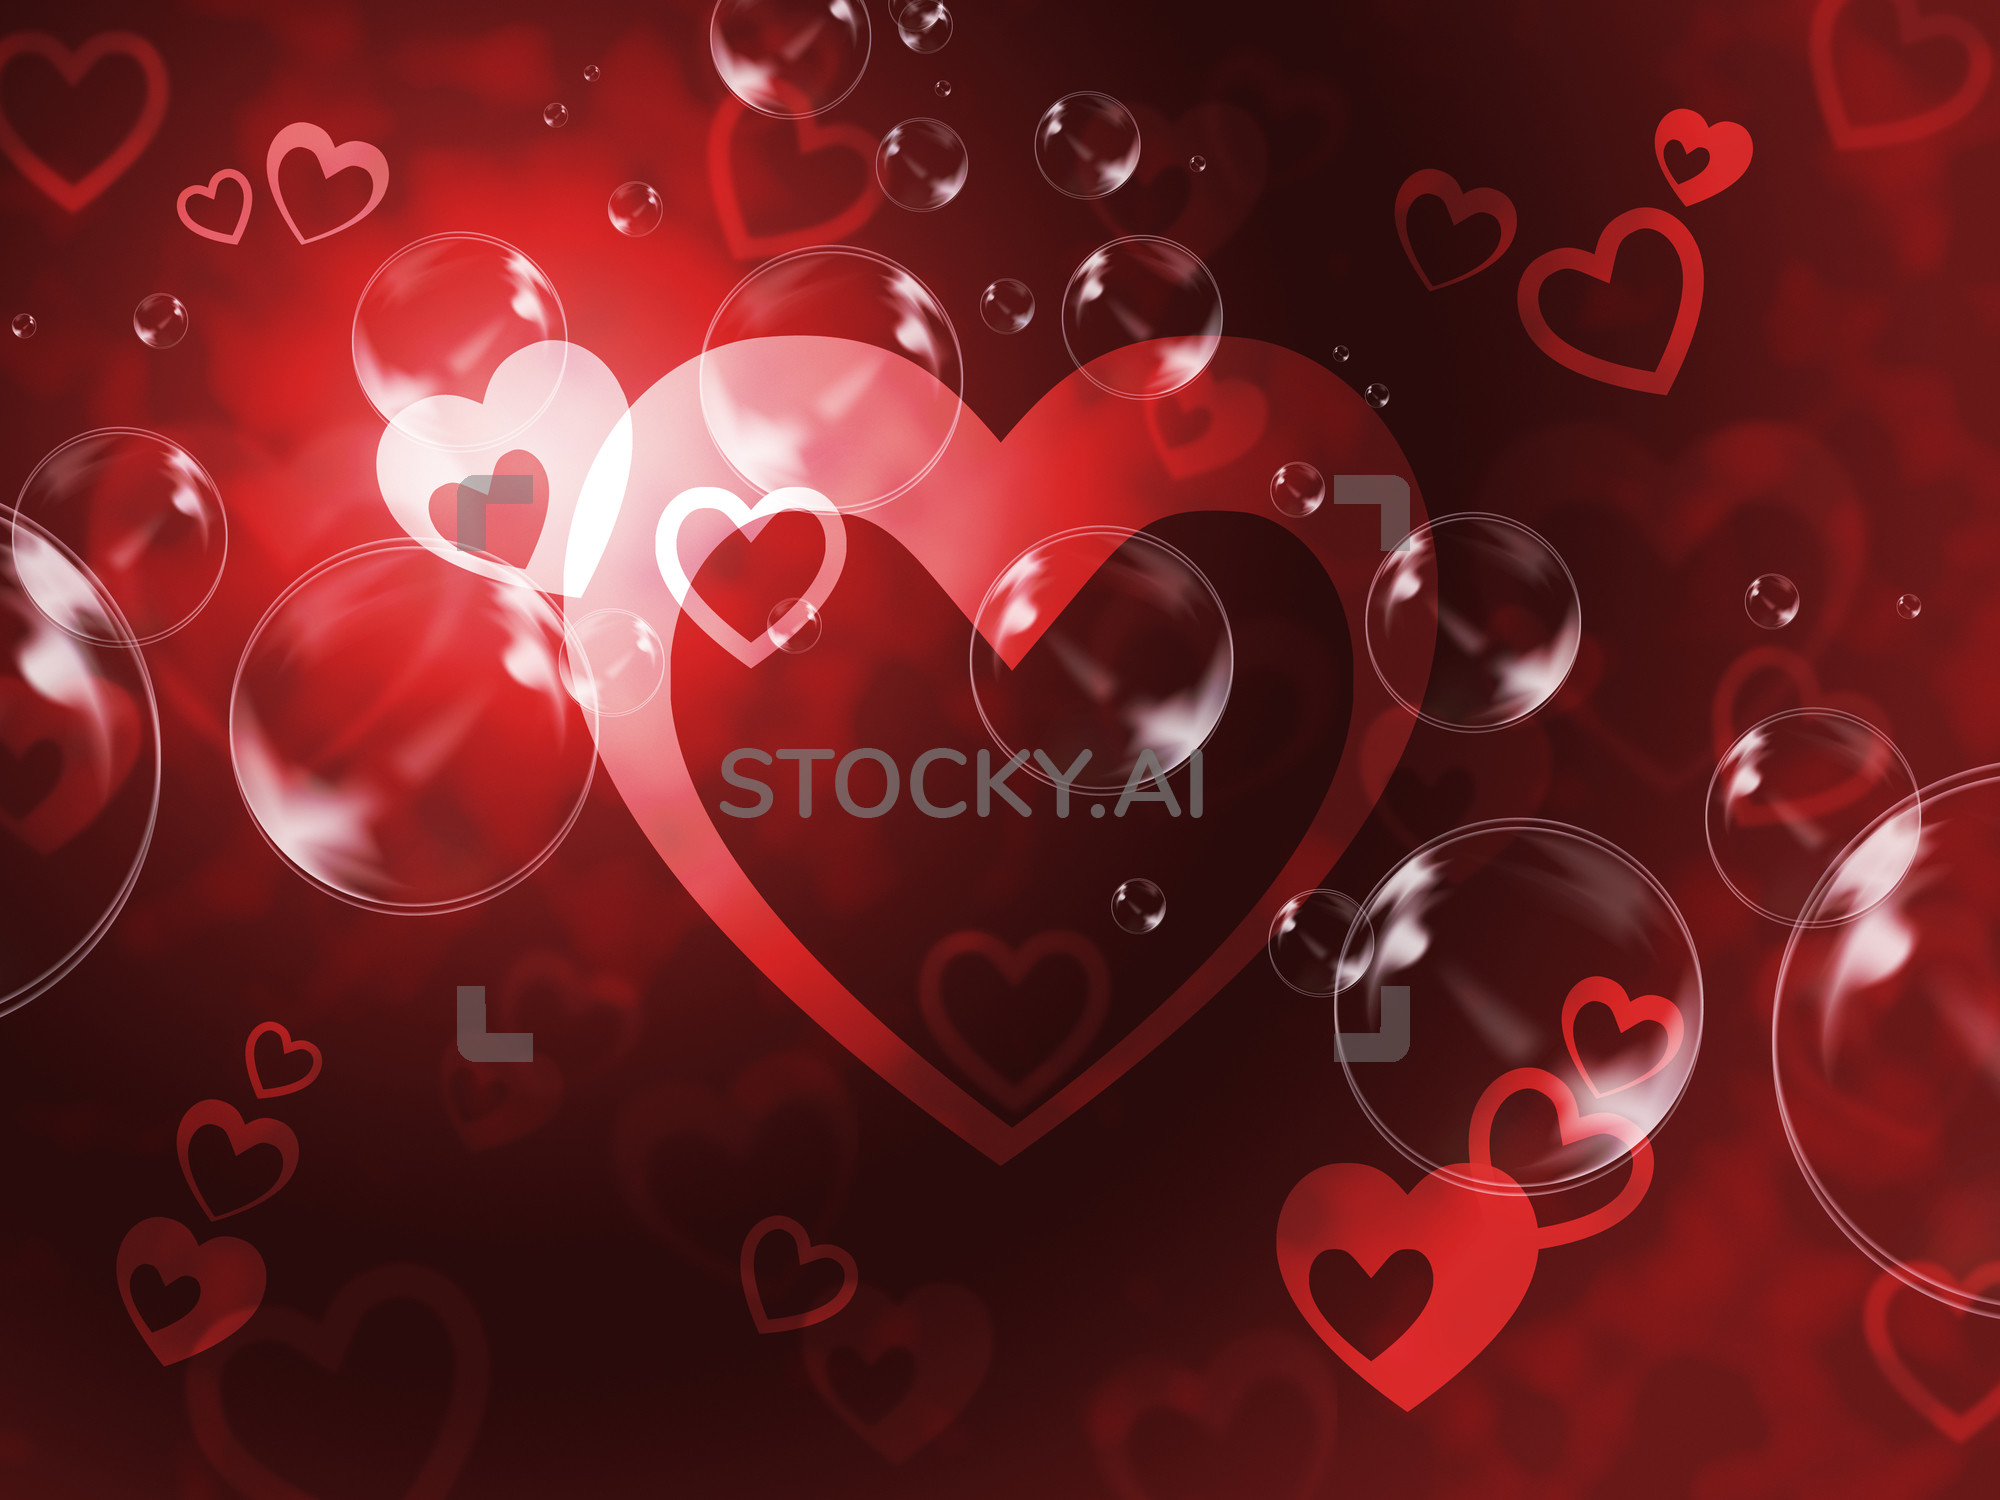 2000x1500 Image of Hearts Background Means Passionate Wallpaper Or Loving Art